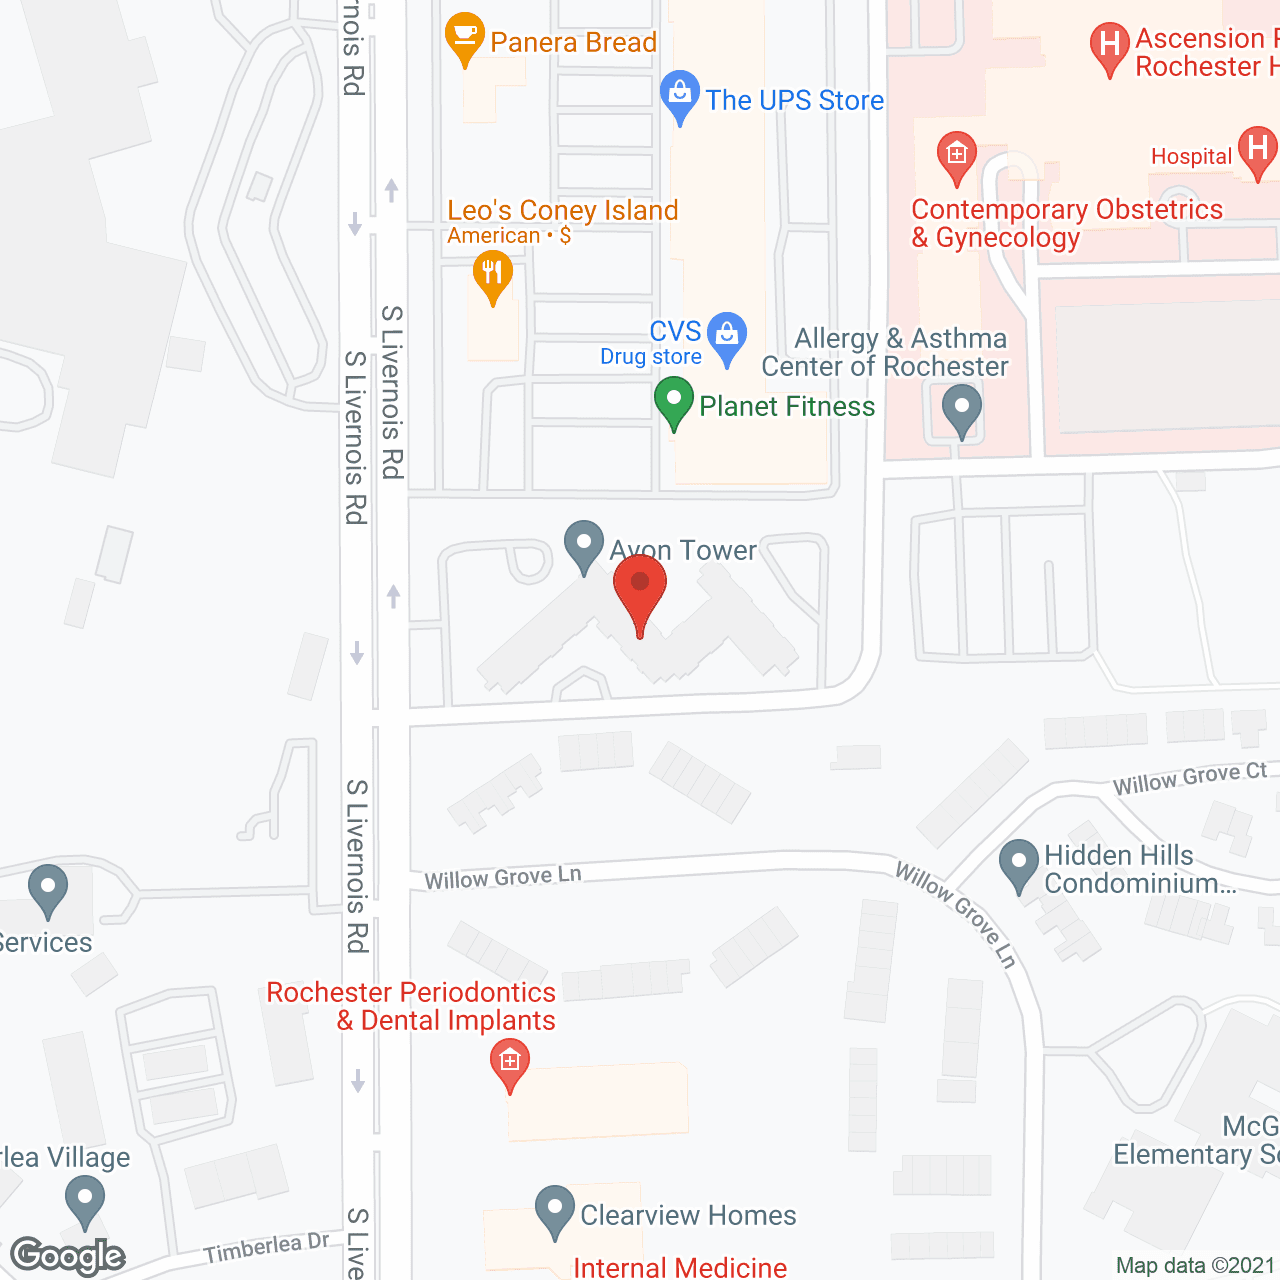 Avon Towers in google map